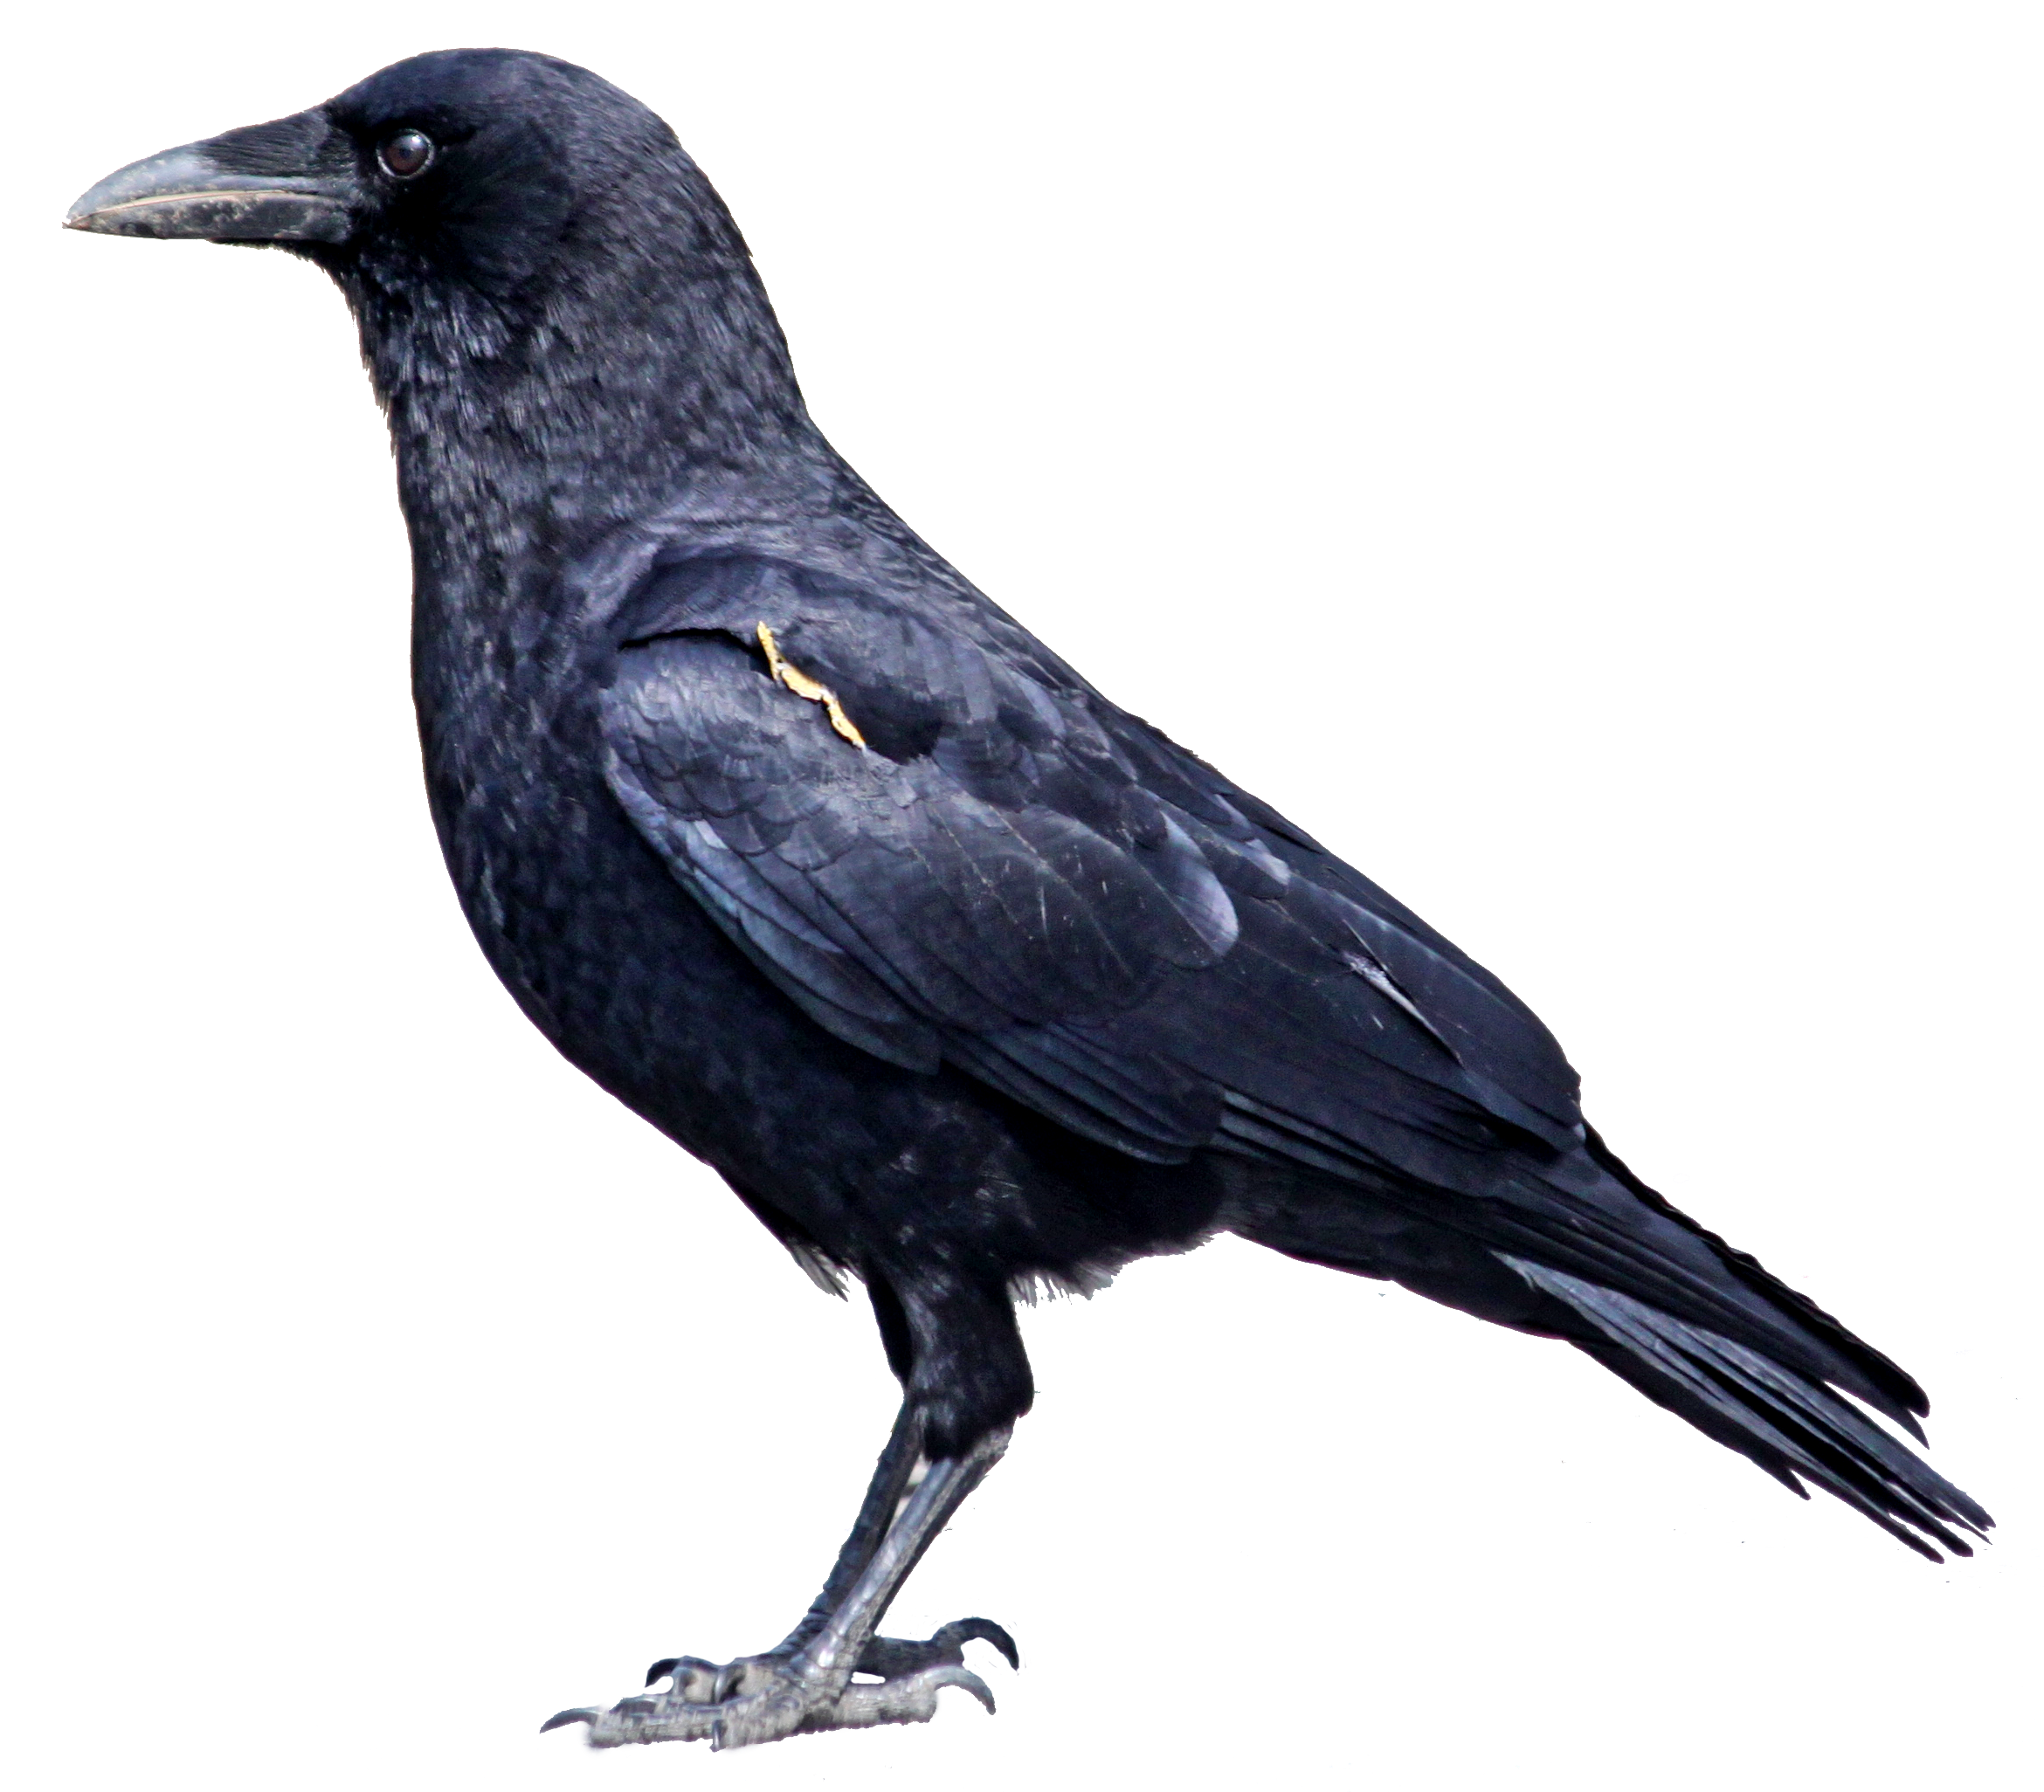 crow clipart white background